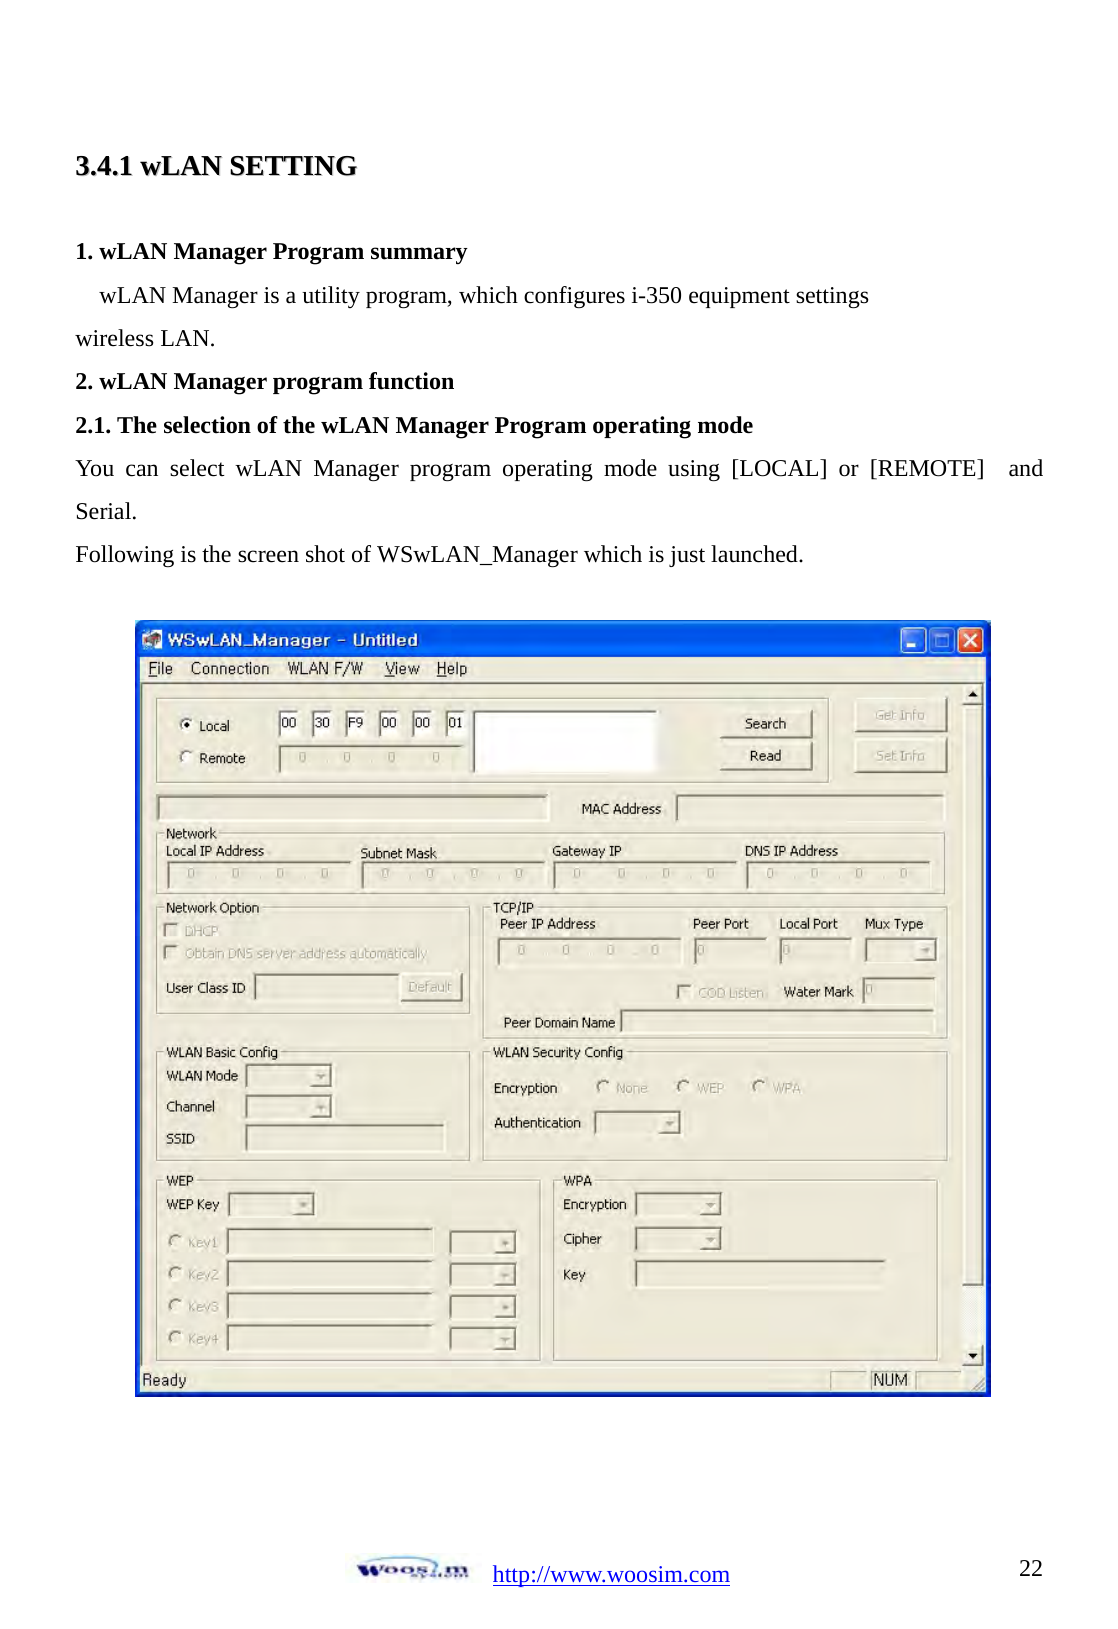  http://www.woosim.com 2233..44..11  wwLLAANN  SSEETTTTIINNGG   1. wLAN Manager Program summary wLAN Manager is a utility program, which configures i-350 equipment settings wireless LAN. 2. wLAN Manager program function 2.1. The selection of the wLAN Manager Program operating mode You can select wLAN Manager program operating mode using [LOCAL] or [REMOTE]  and Serial. Following is the screen shot of WSwLAN_Manager which is just launched.     